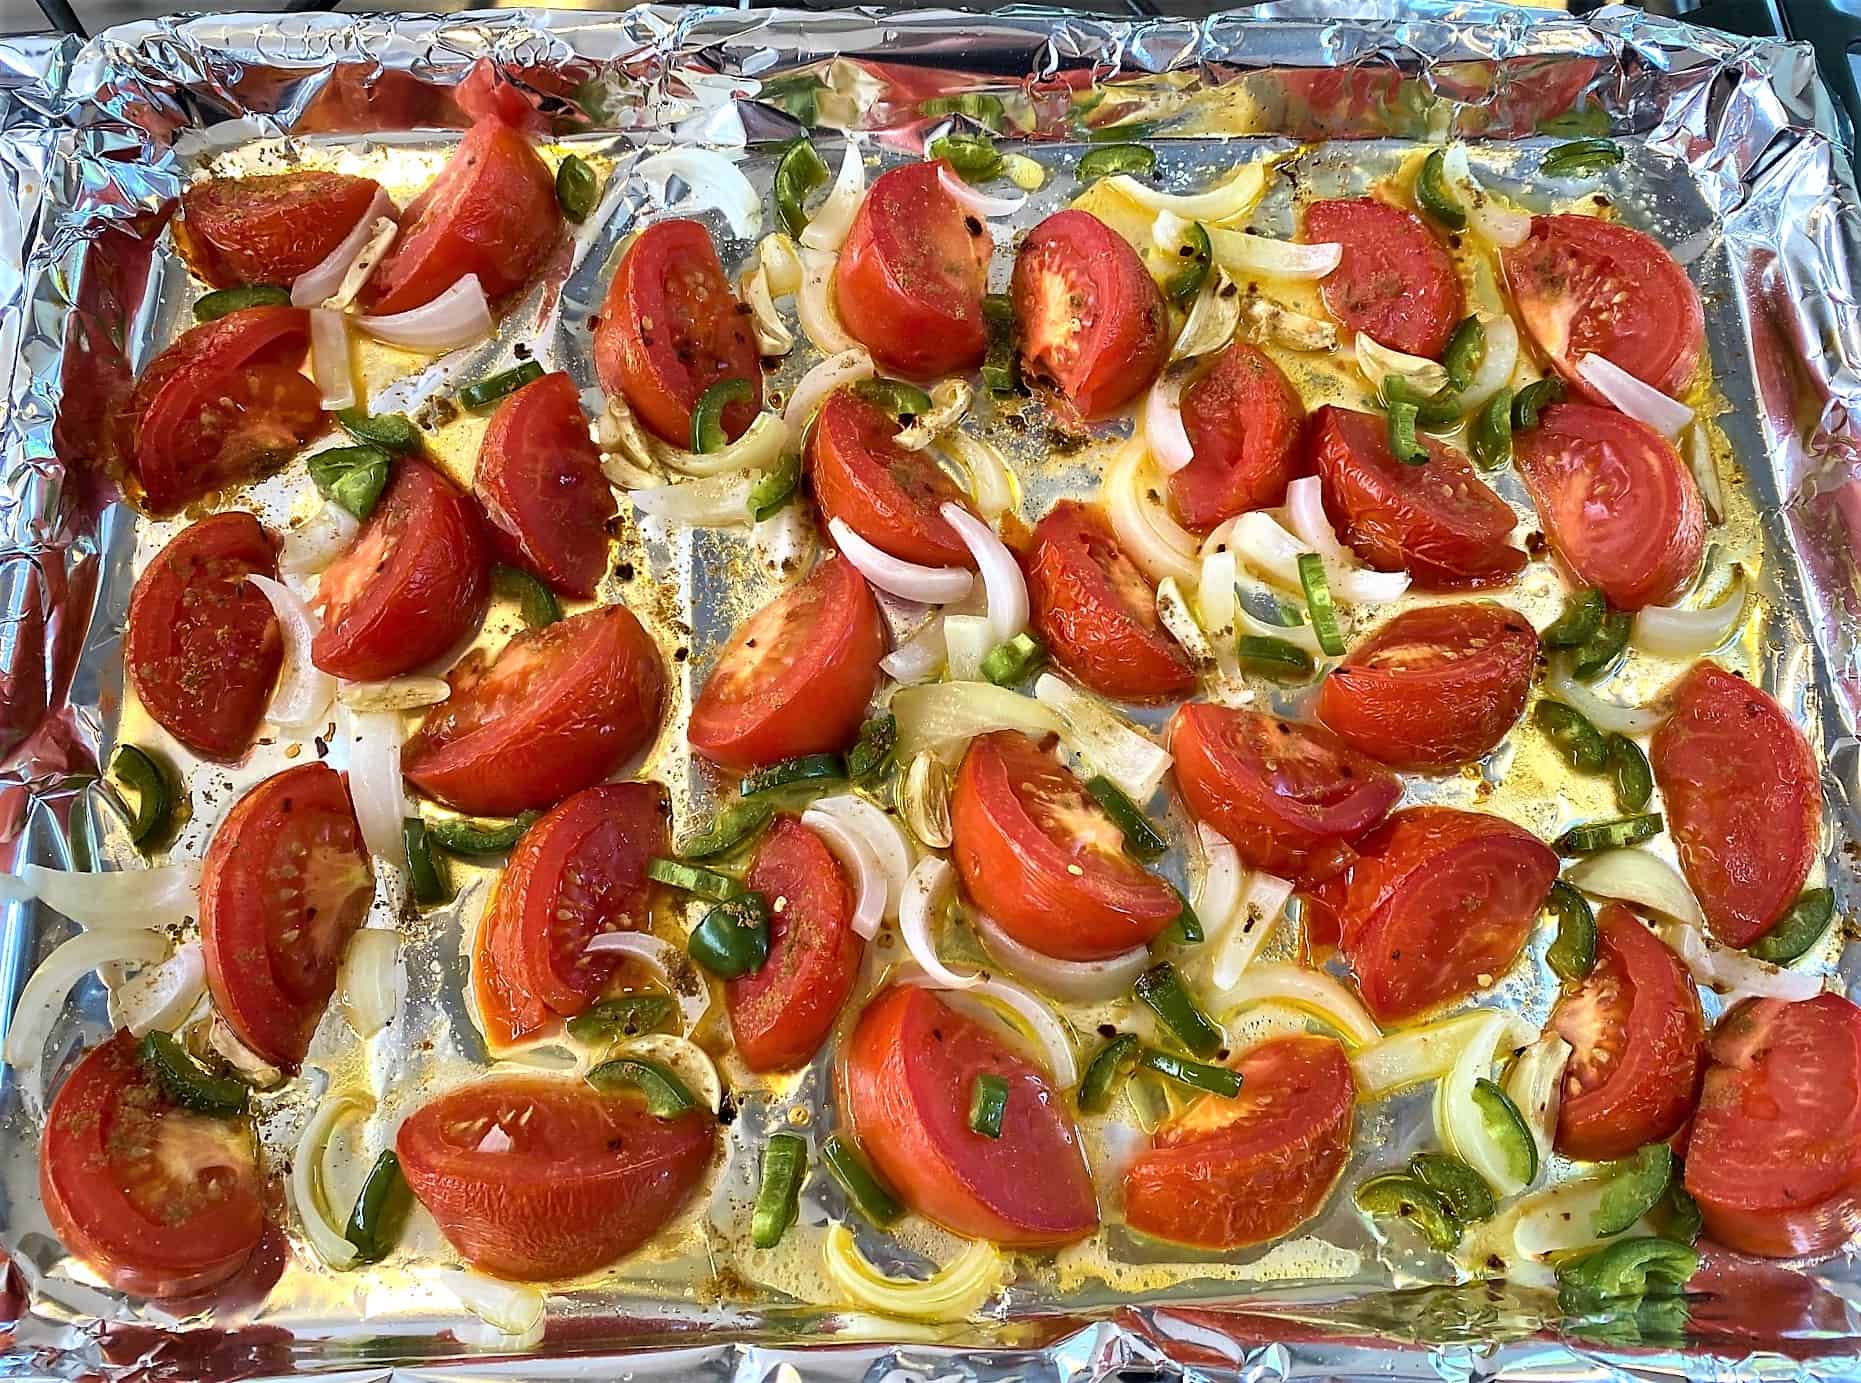 Barely cooked tomato wedges, green peppers, onions and seasonings on foil-lined sheet pan